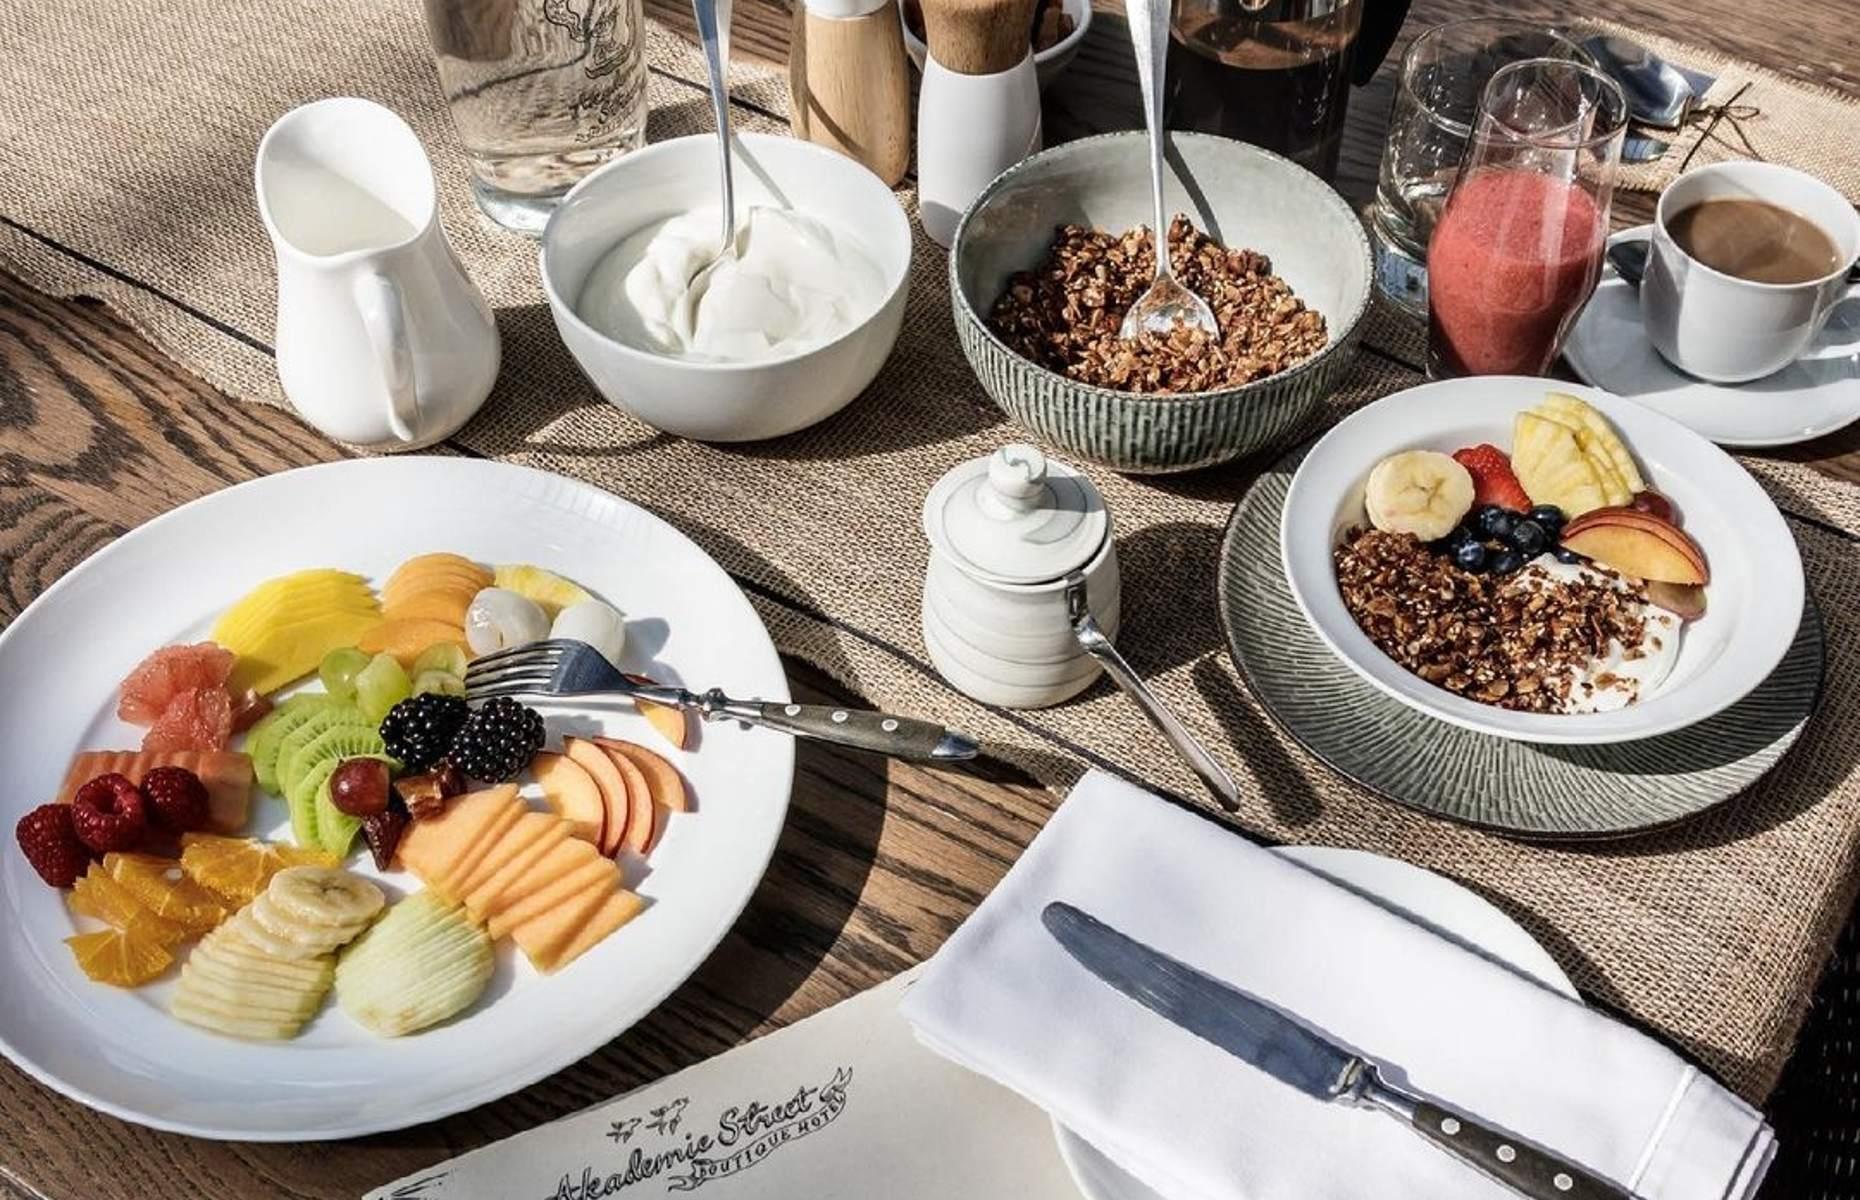 <p>Franschhoek may be renowned for its fine wines, but rumor has it that the breakfasts in town are pretty top-drawer too – especially at the <a href="https://www.aka.co.za/">Akademie Street Boutique Hotel</a>. There's no added cost, making this perhaps the chicest bed and breakfast going. Guests are led into the property’s tranquil orangery where a luxuriously wholesome offering of seasonal fruit, home-roasted granola, pastries and yogurt awaits, as well as a plentiful choice of cooked dishes that can be washed down with a coffee, a smoothie or even a glass of Champagne.</p>